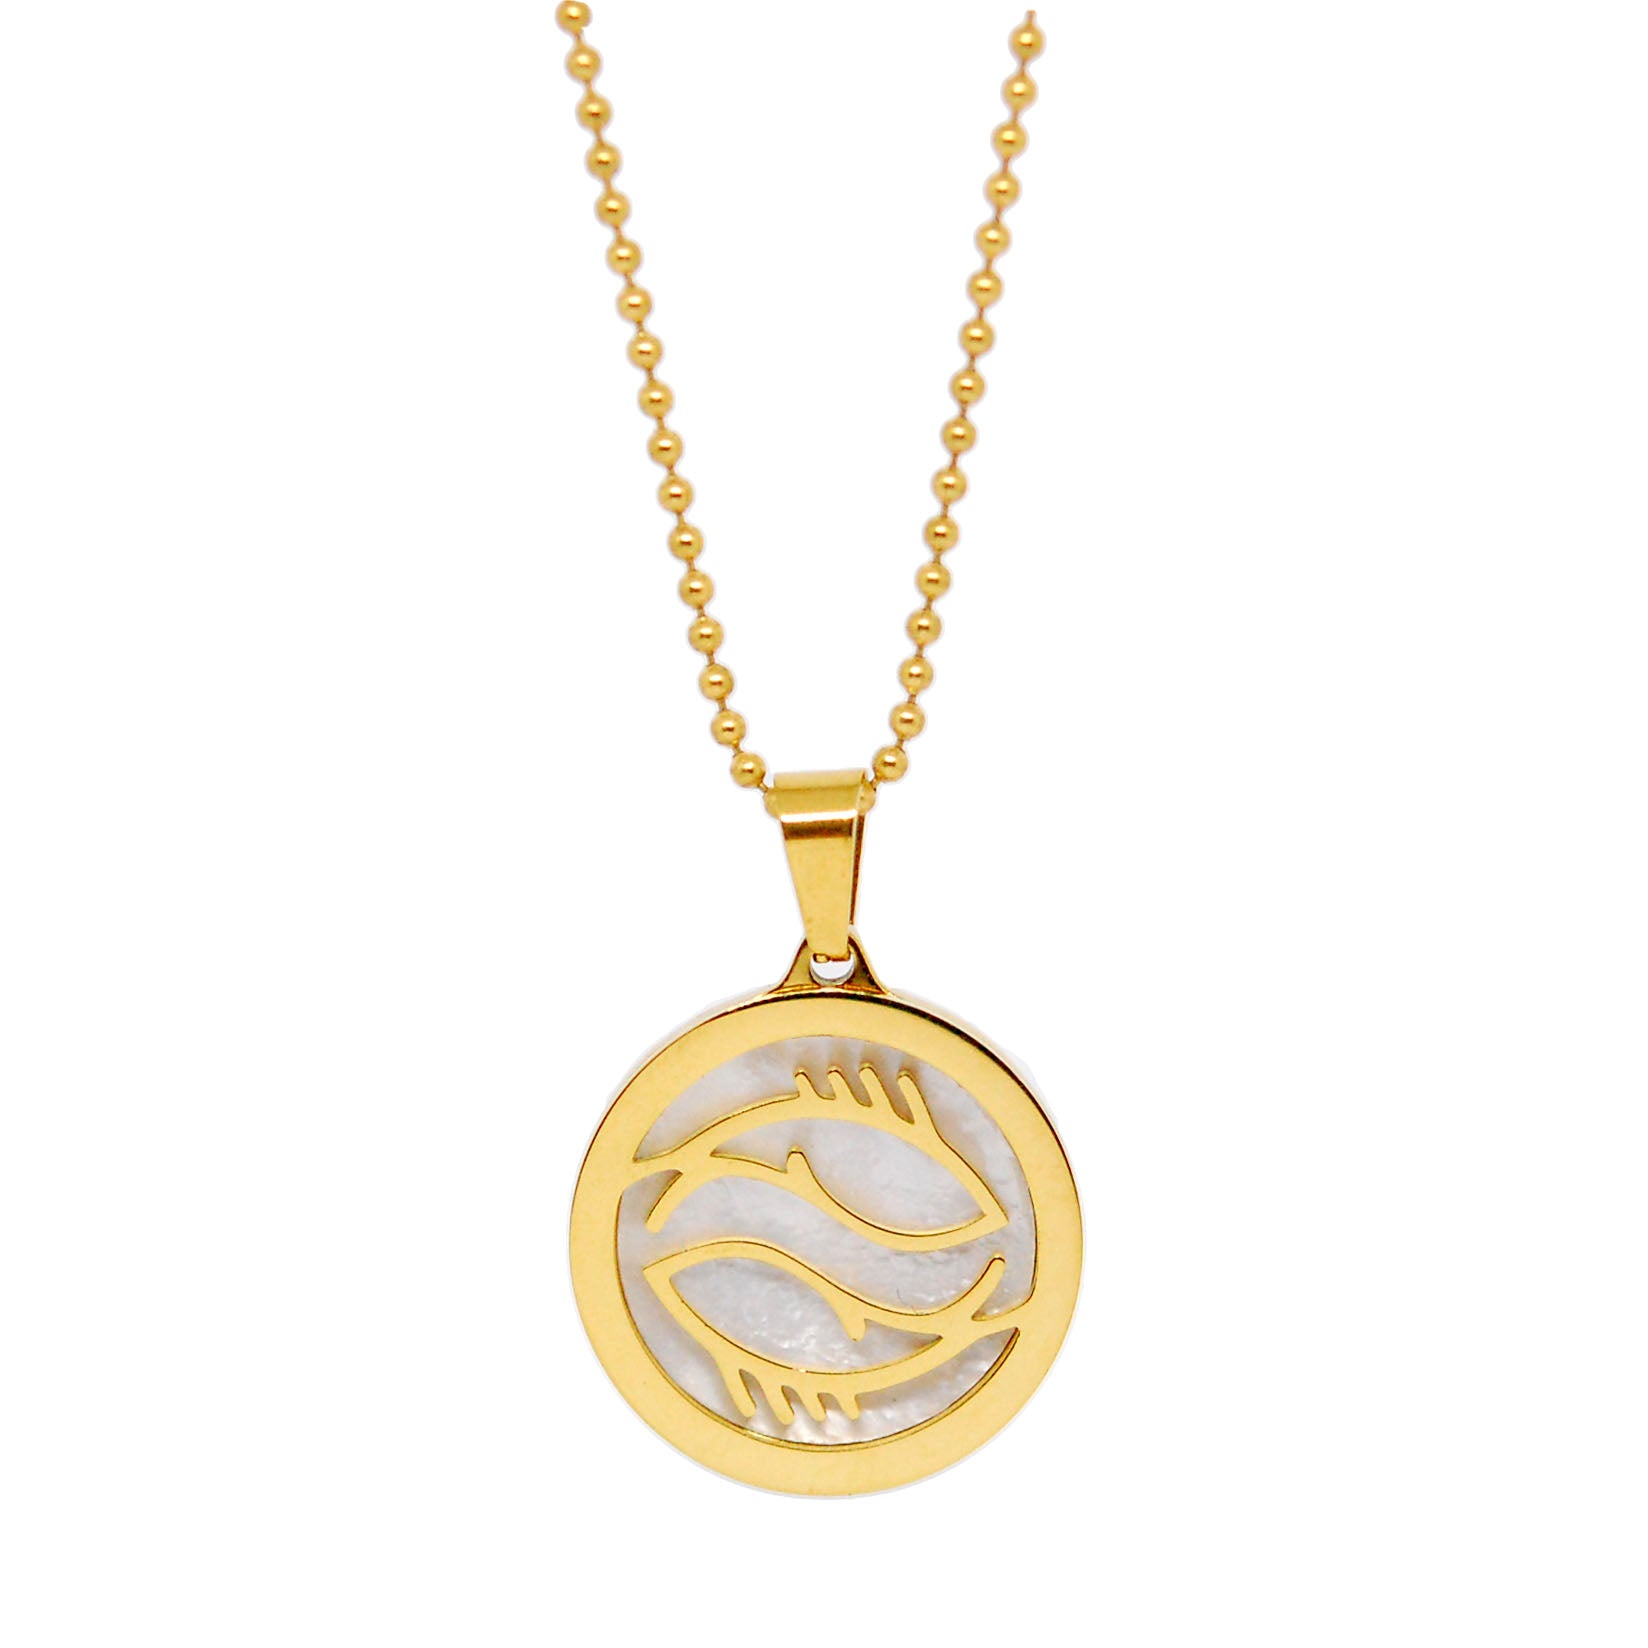 ESN 7964: All IPG Mop Pisces Zodiac Necklace w/ 18" IPG Ball Chain